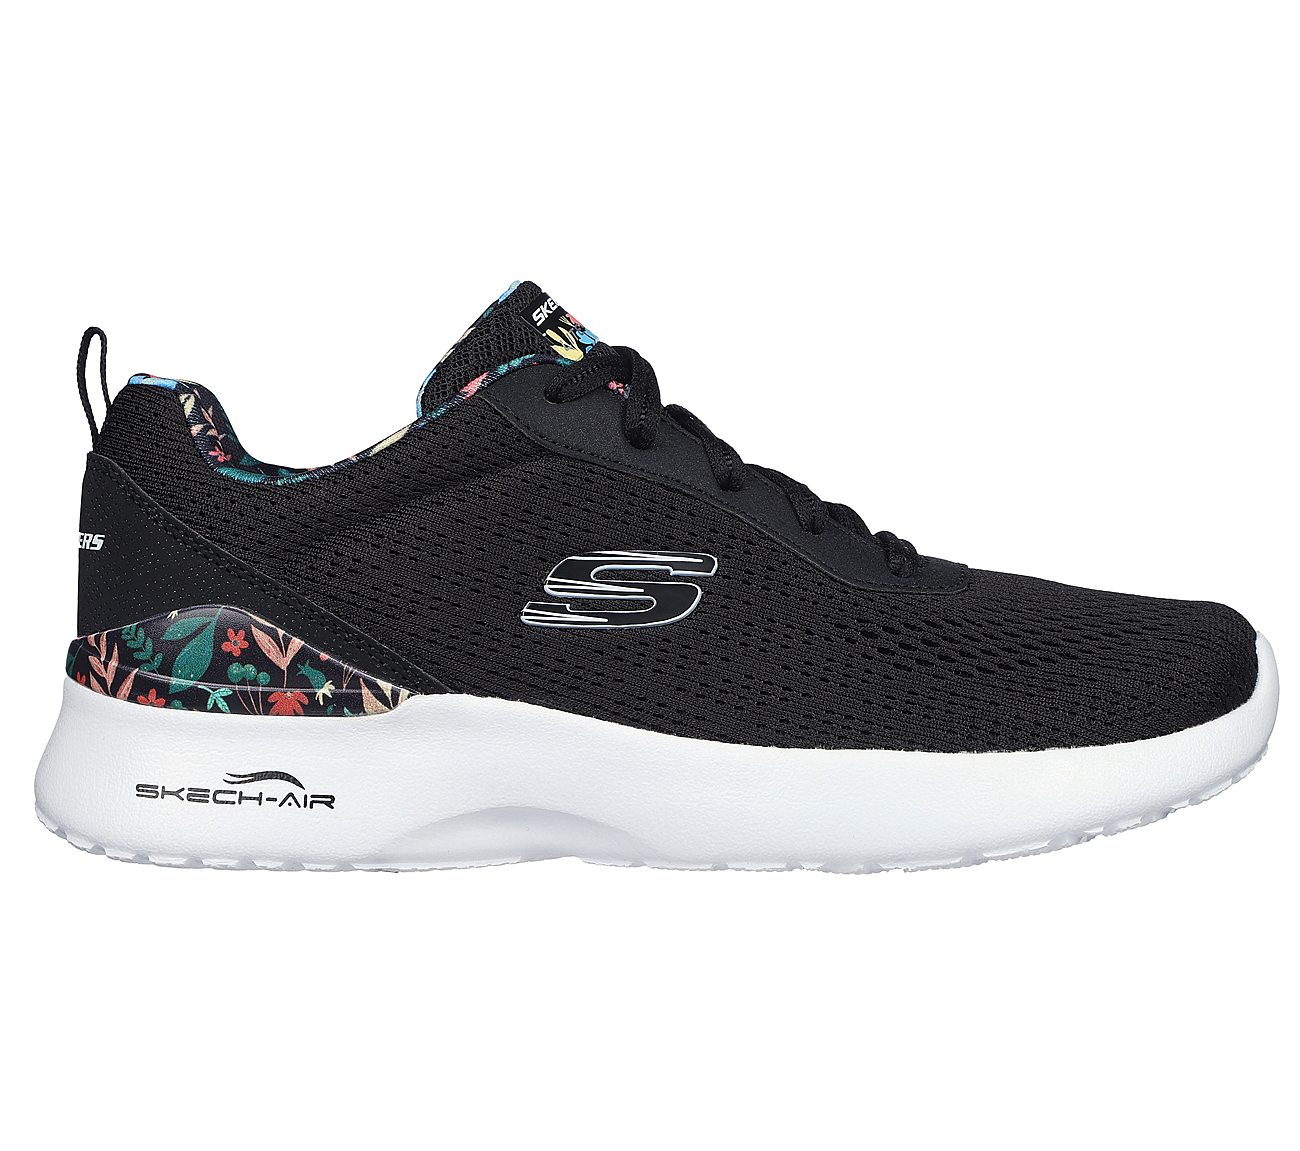 SKECH-AIR DYNAMIGHT-LAID OUT, BLACK/MULTI Footwear Lateral View